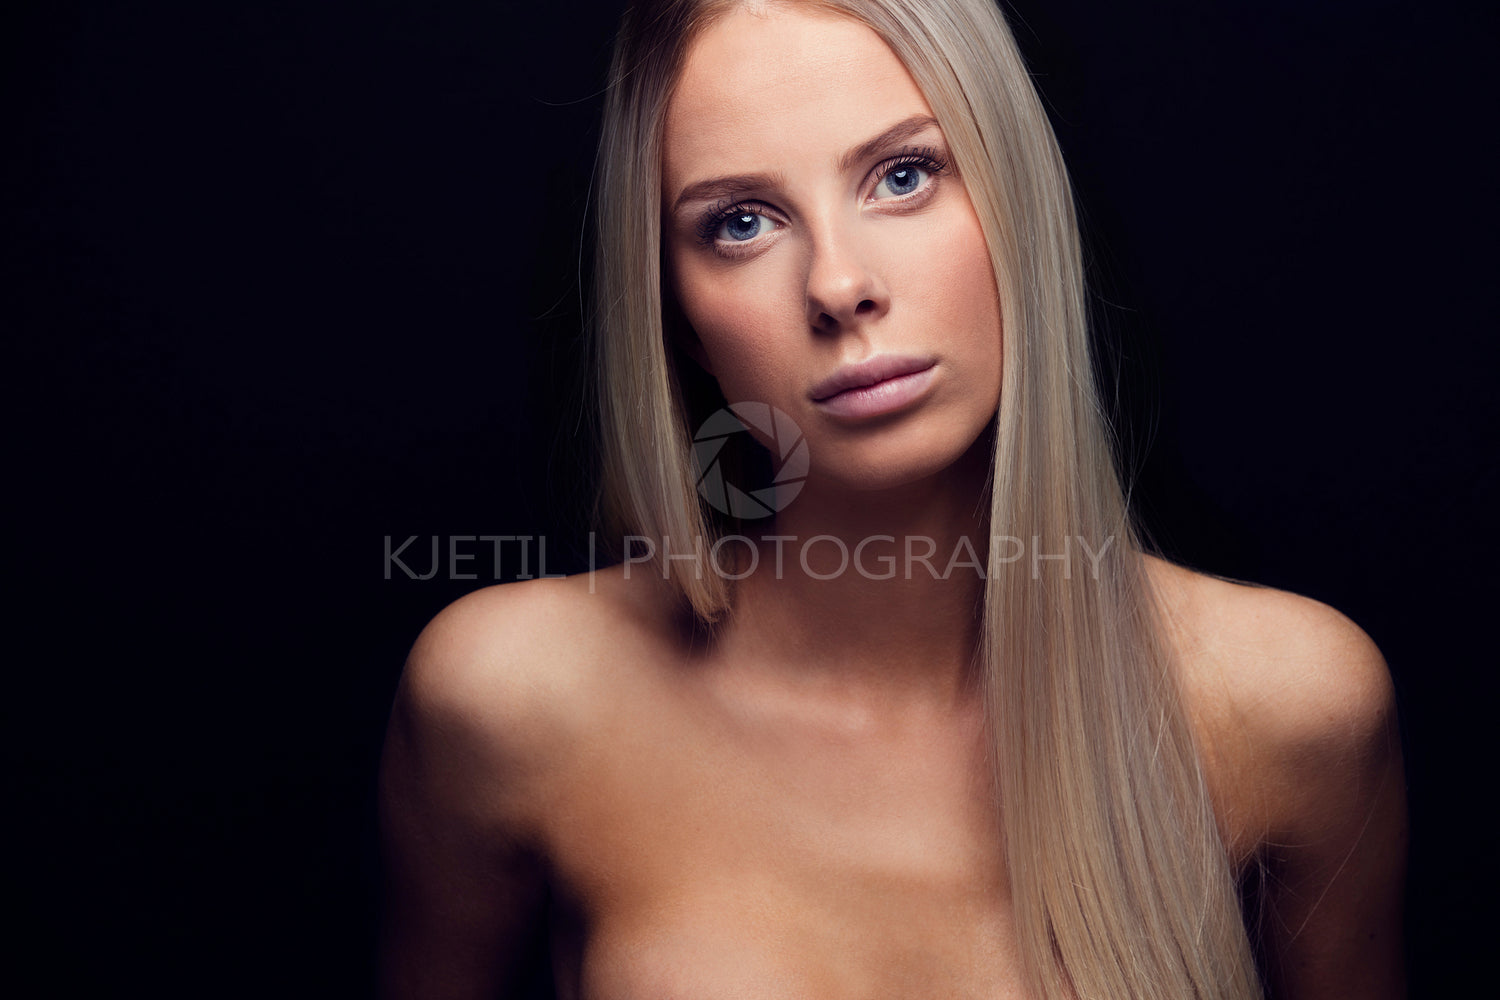 Portrait of a beautiful young woman with blonde hair